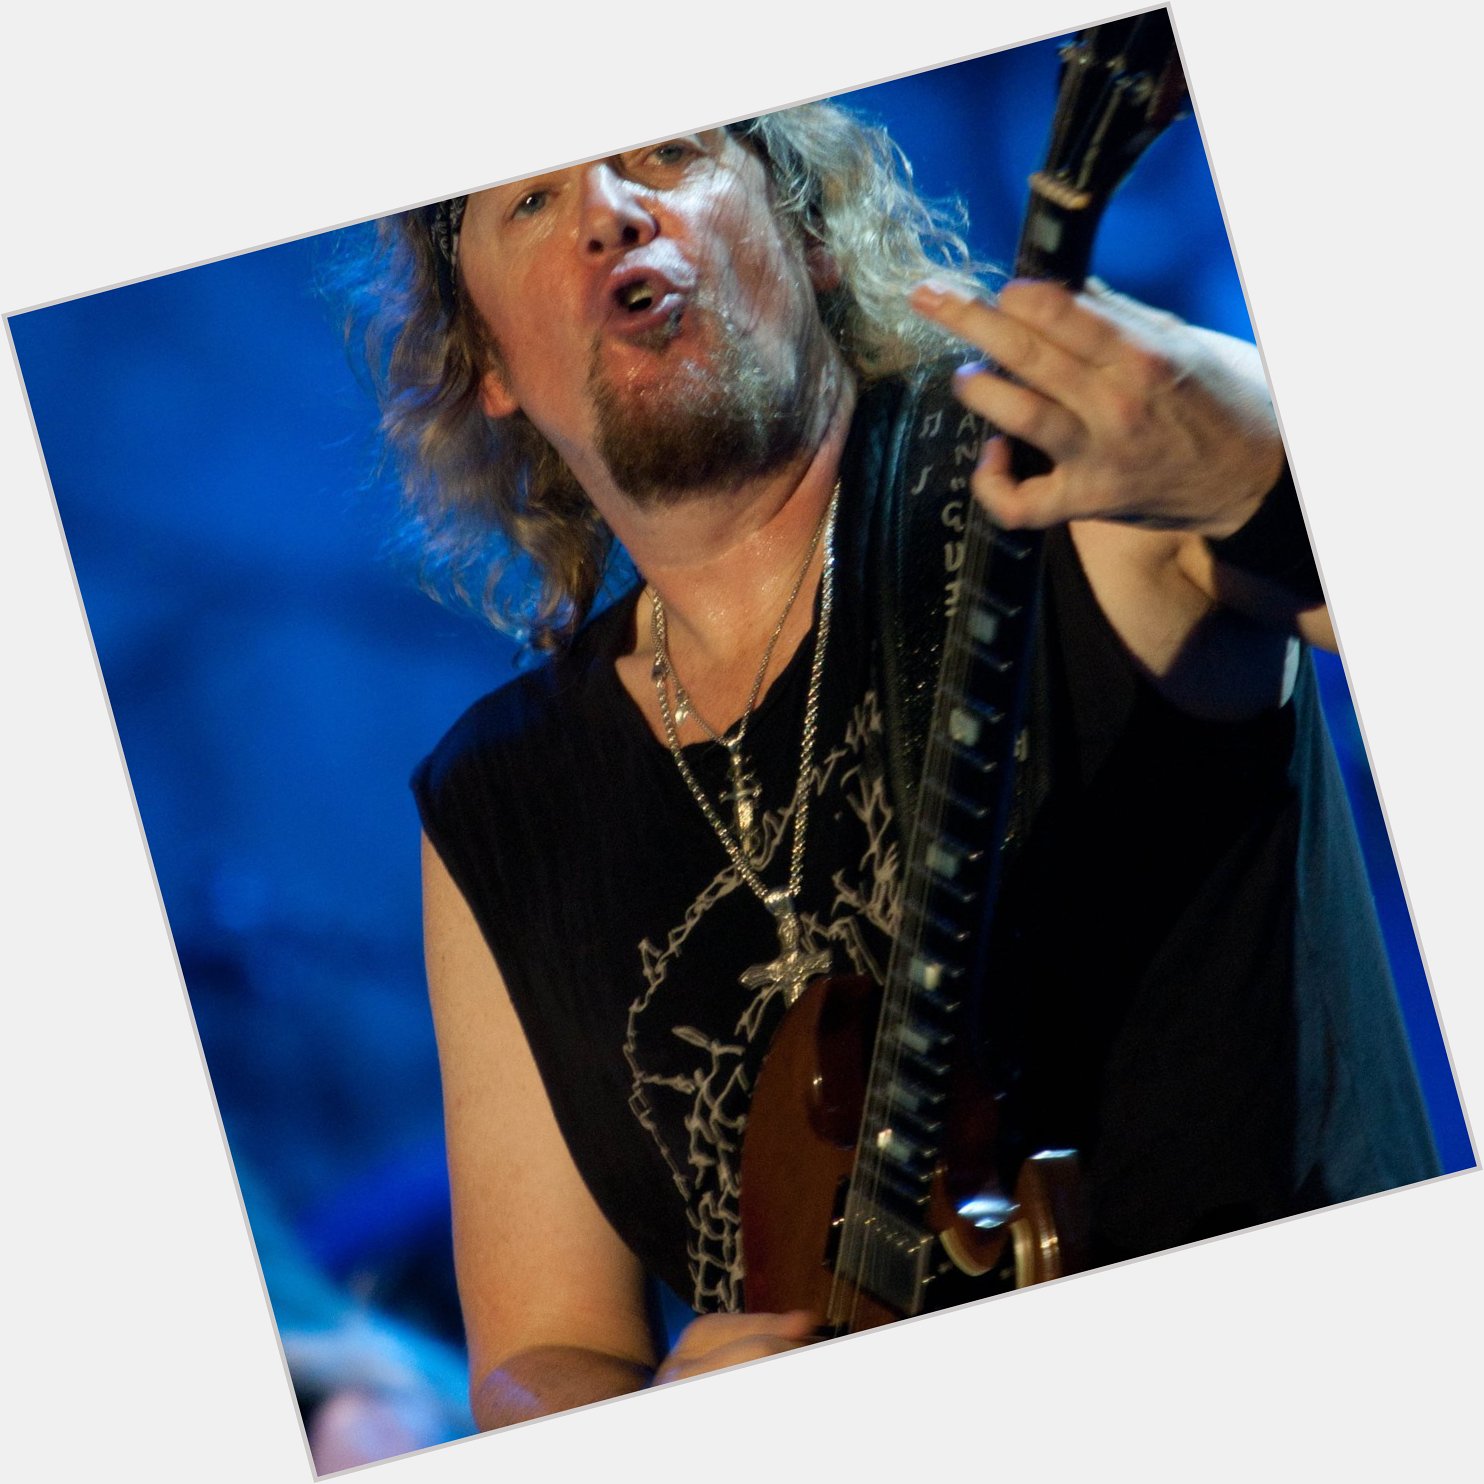 Happy Birthday to the great Adrian Smith!! Born On This Day: February 27, 1957 